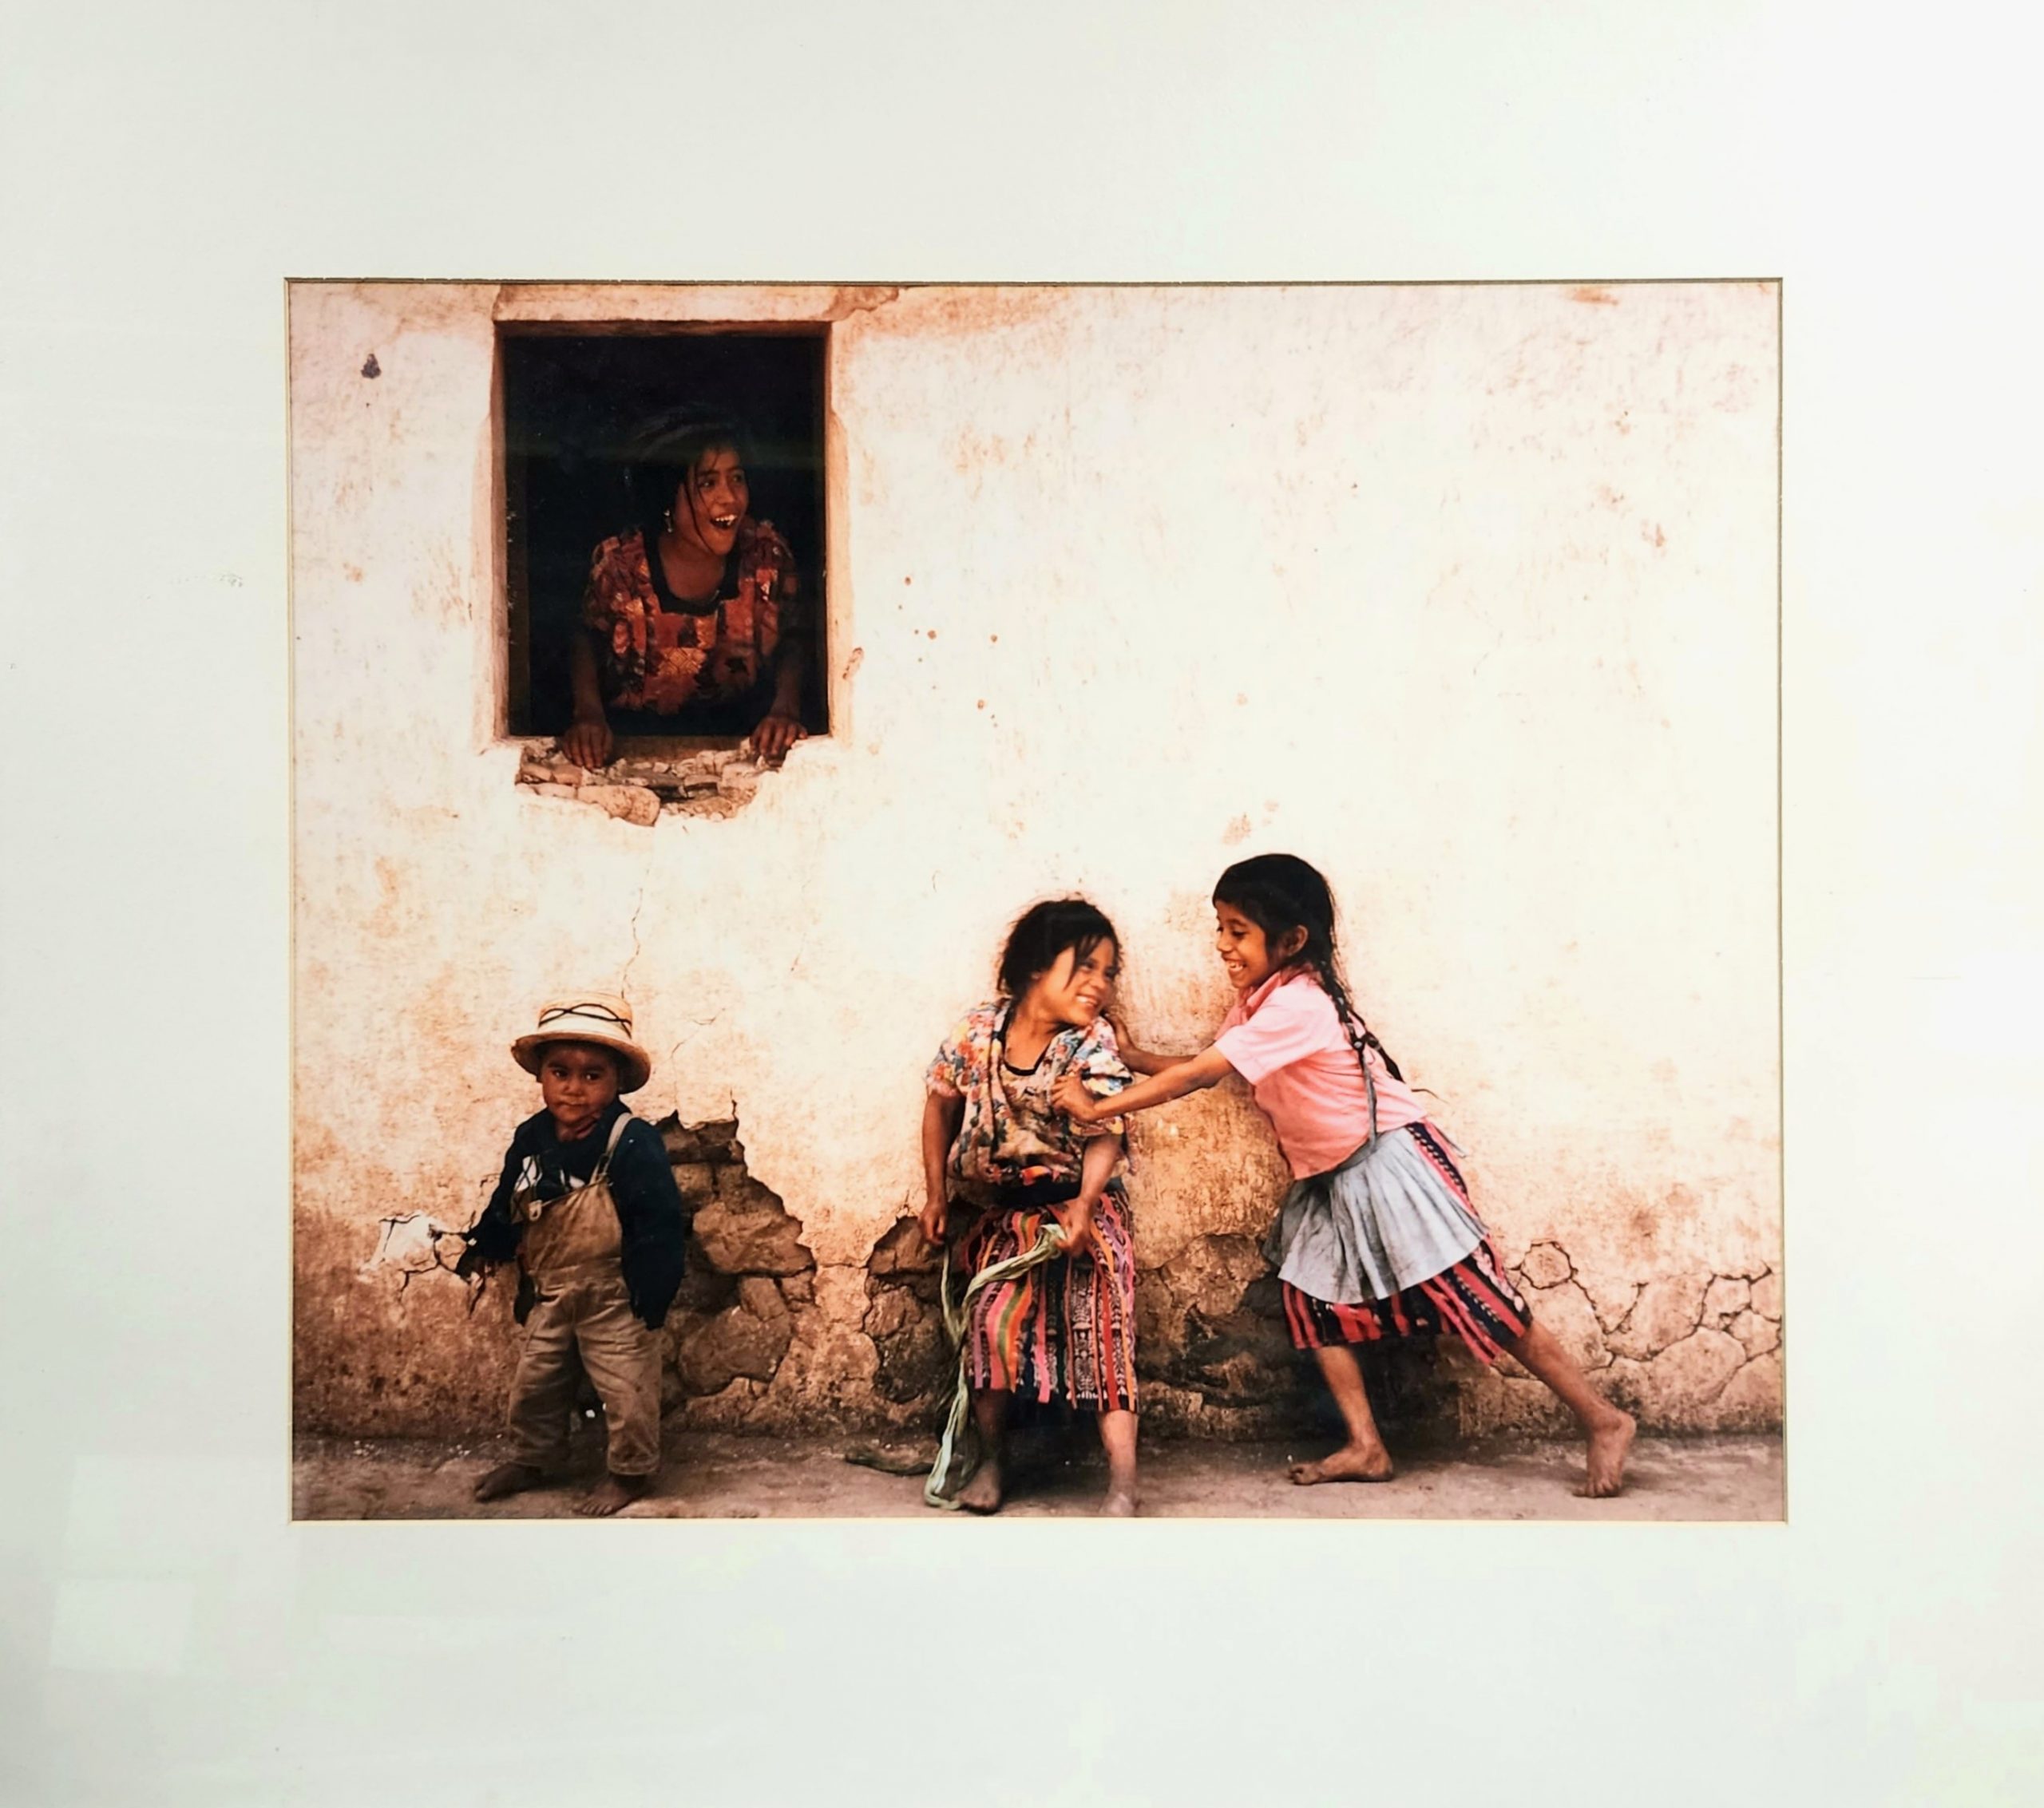 "Three Children Against Wall" by Isadore Berson